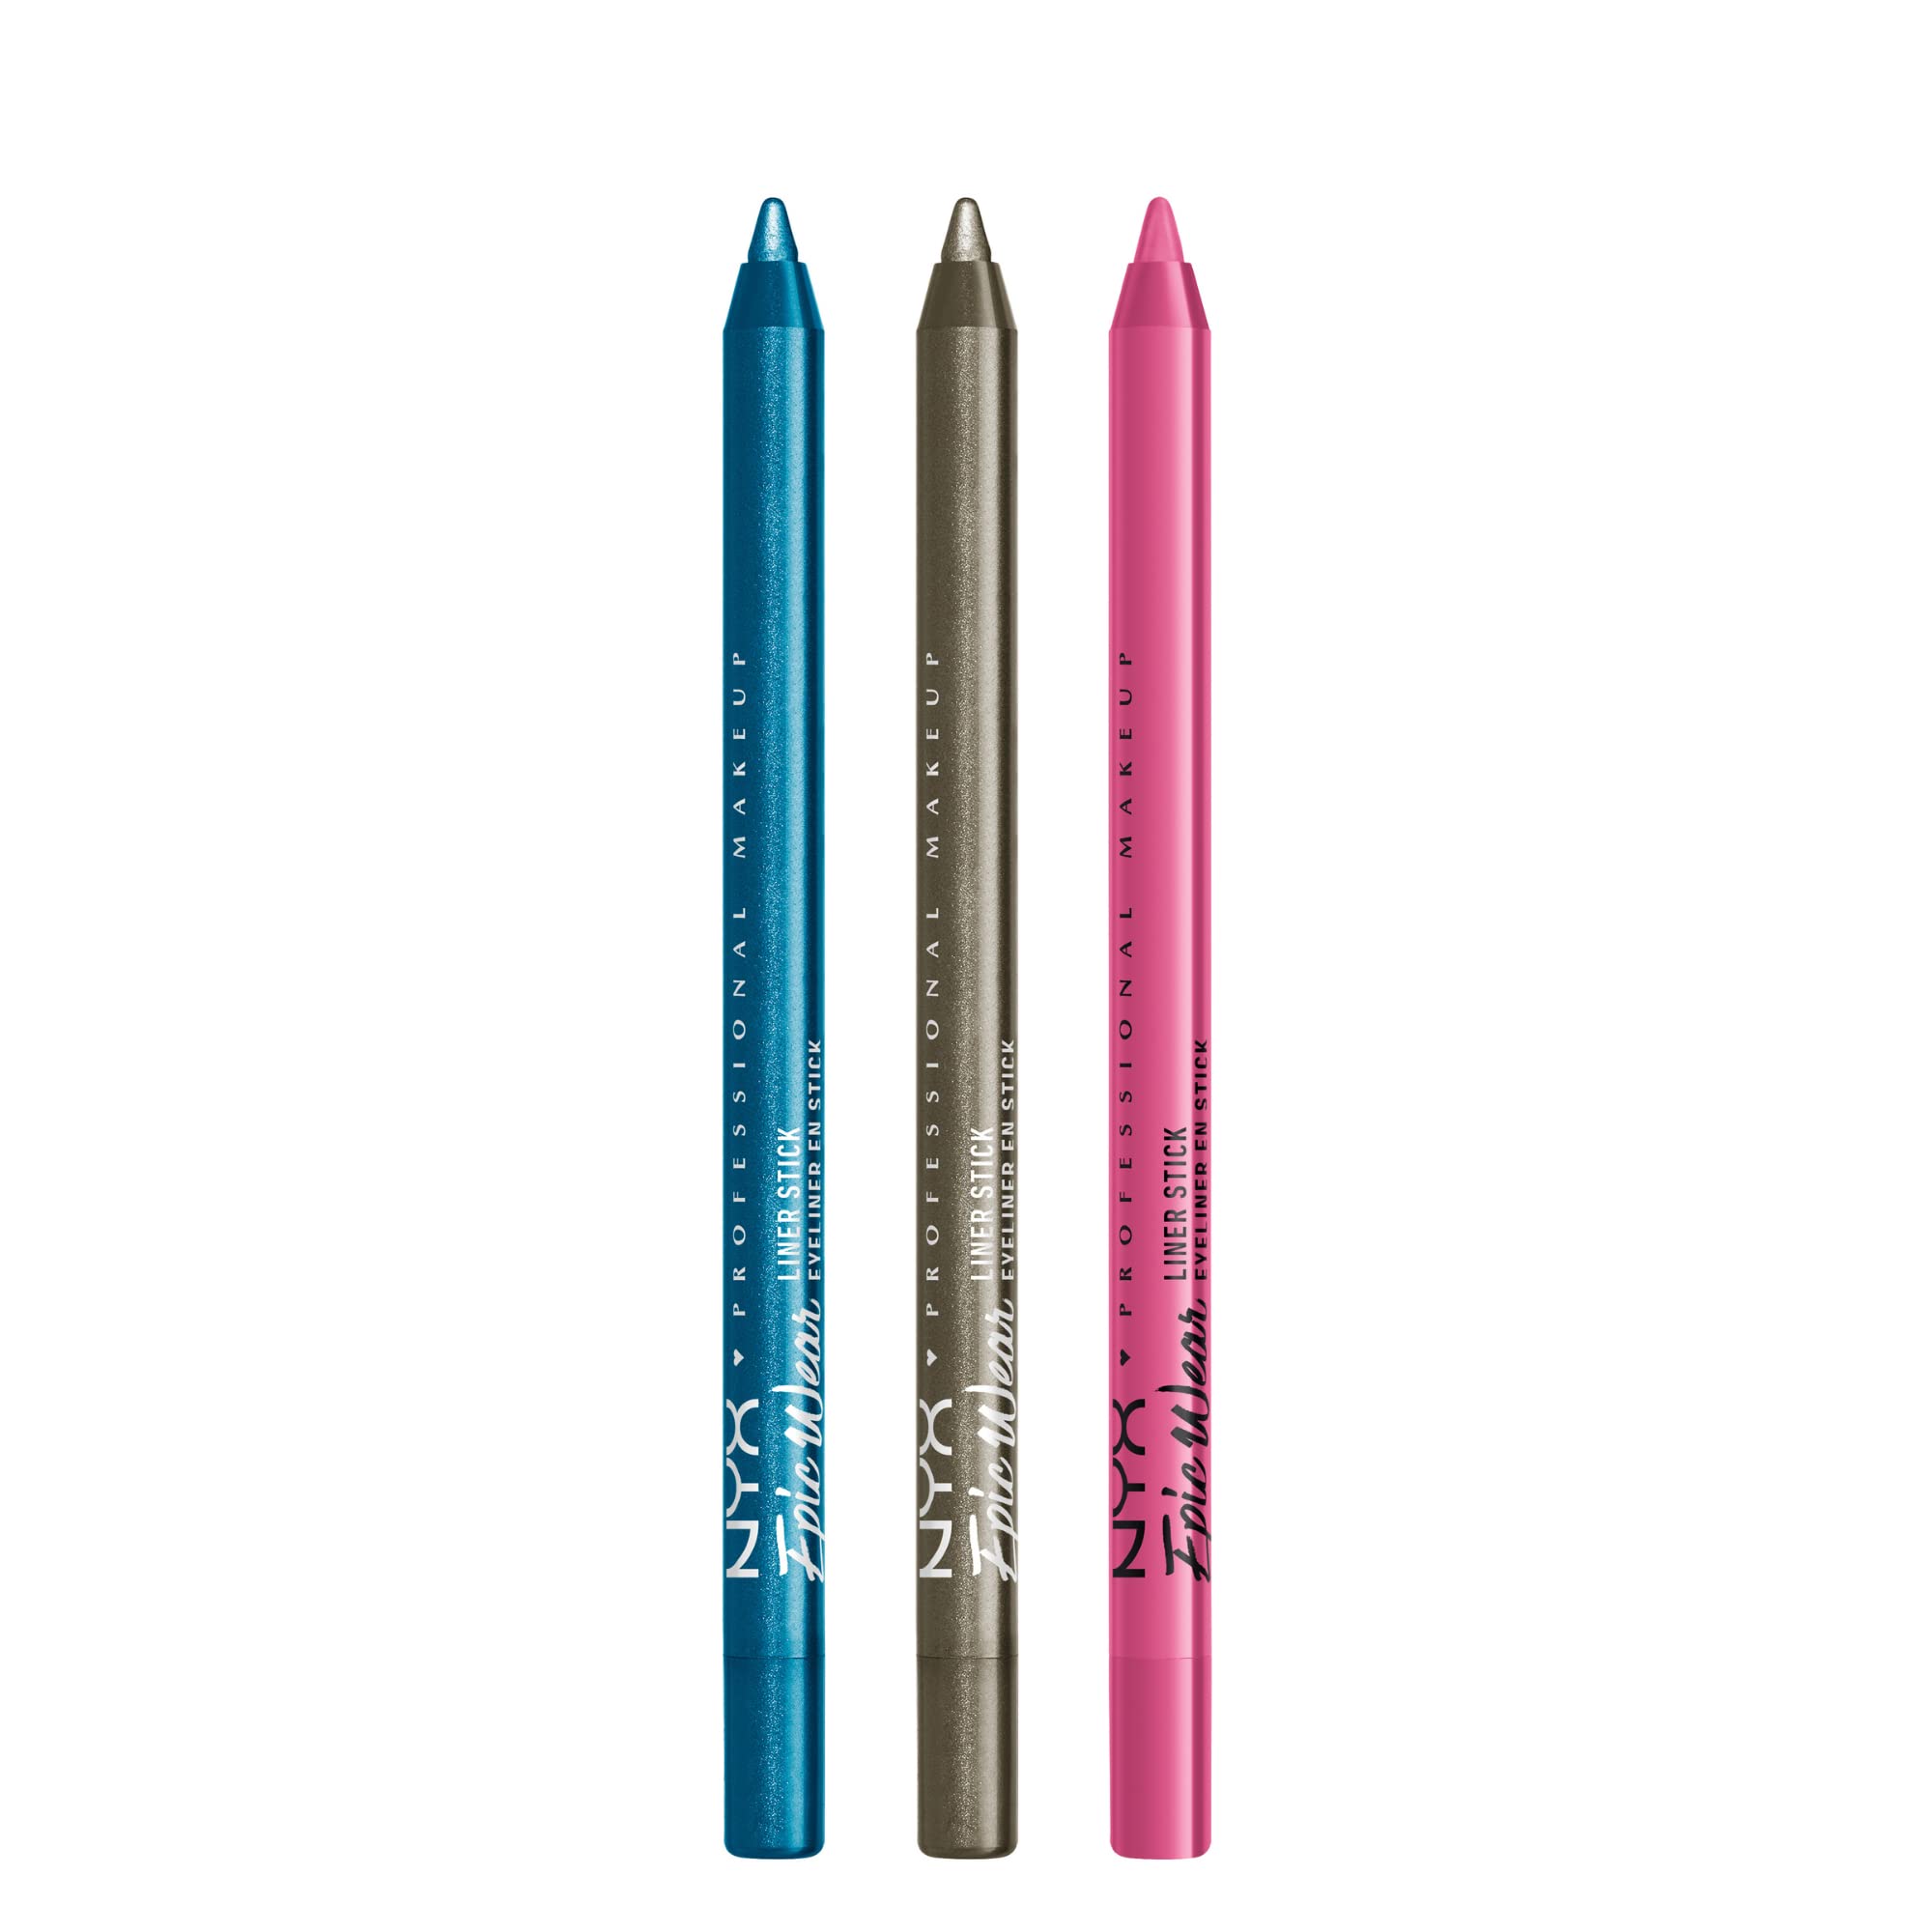 Storm Eyeliner PROFESSIONAL of MAKEUP - 3 Long-Lasting Stick Epic NYX Pencil Pack (Turquoise Wear Liner